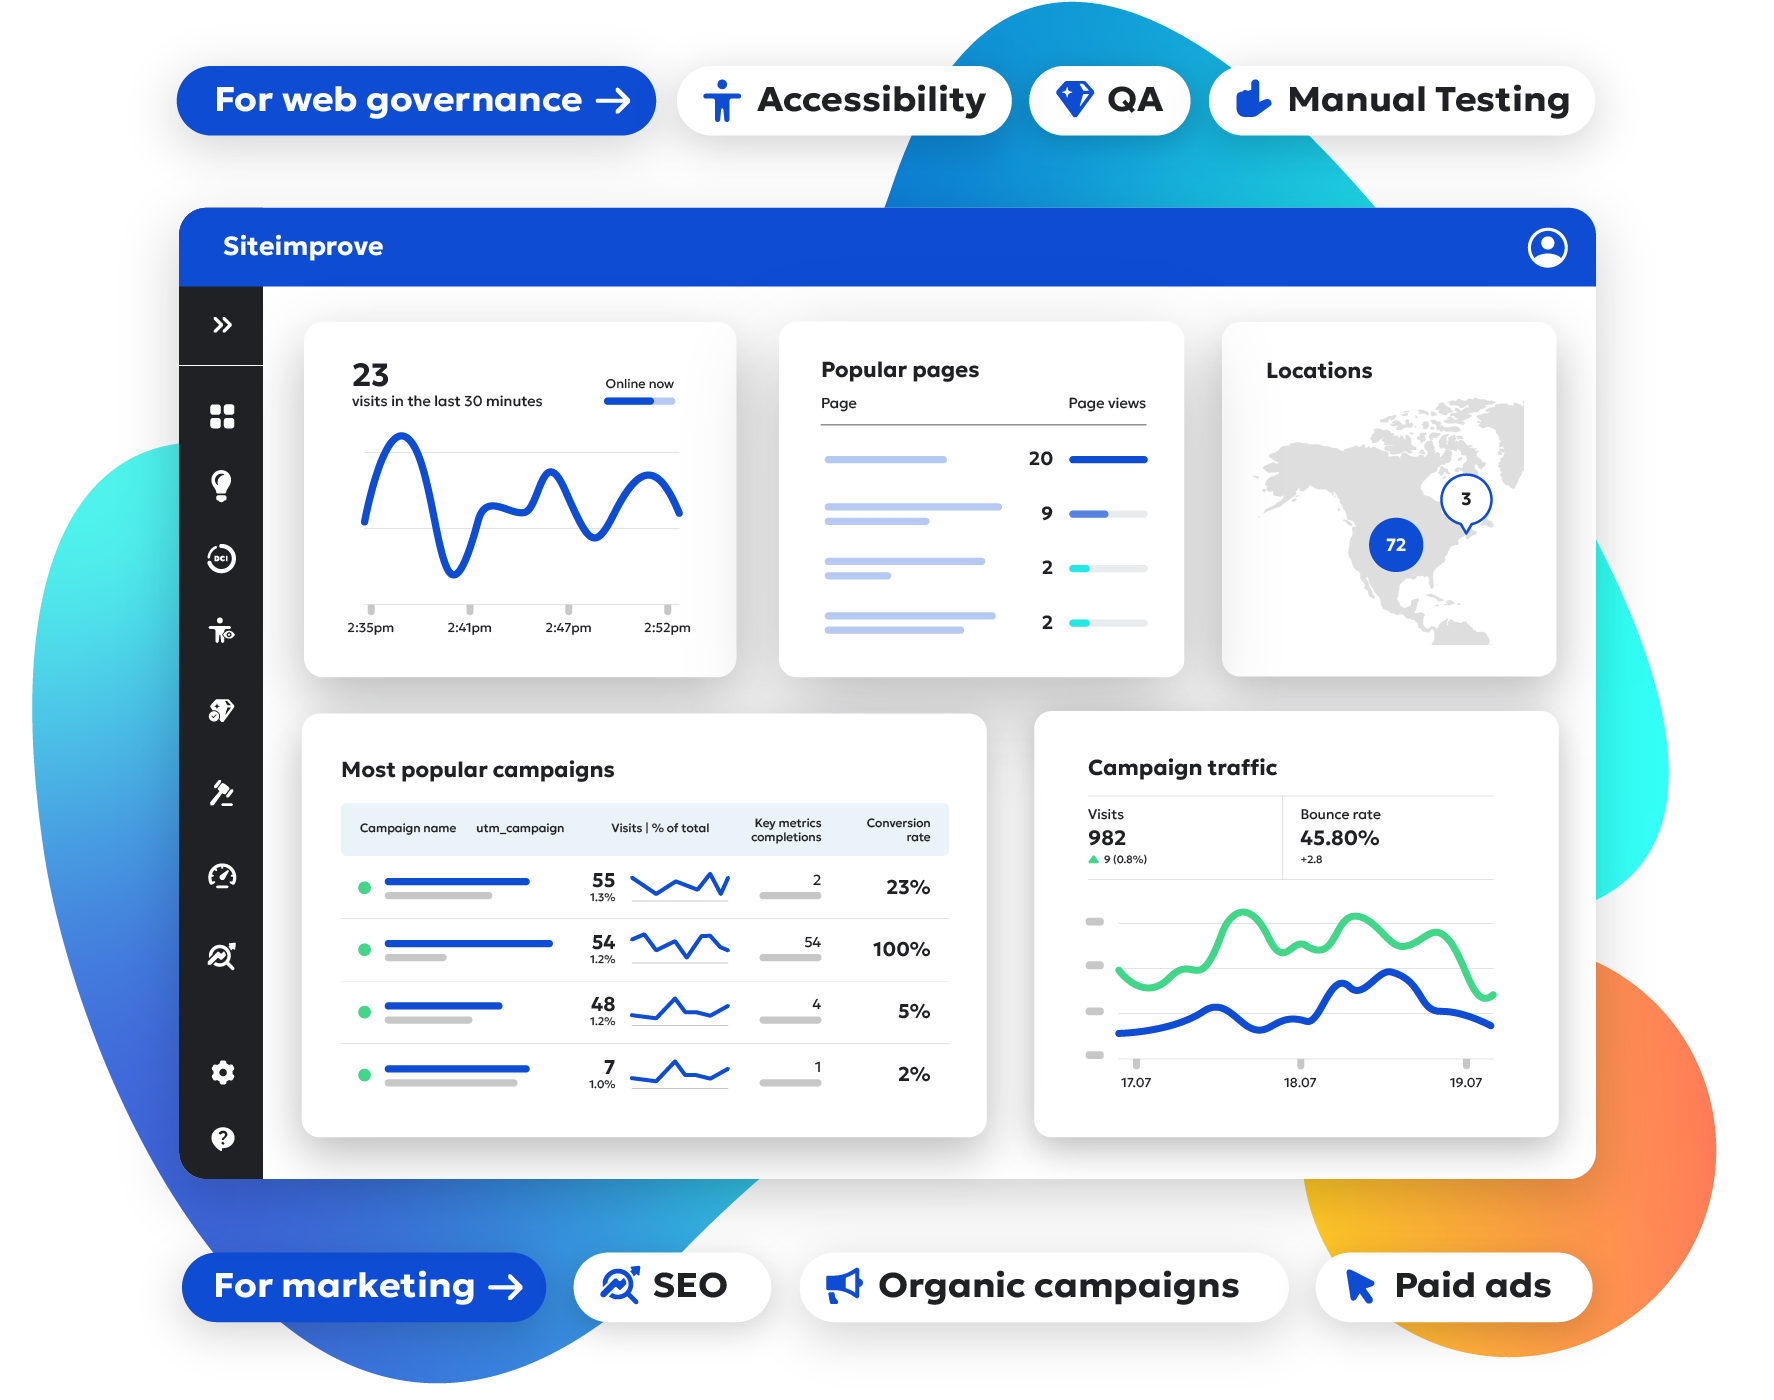 Siteimprove dashboard displaying various seo, accessibility, and quality assurance metrics, including charts and data points.